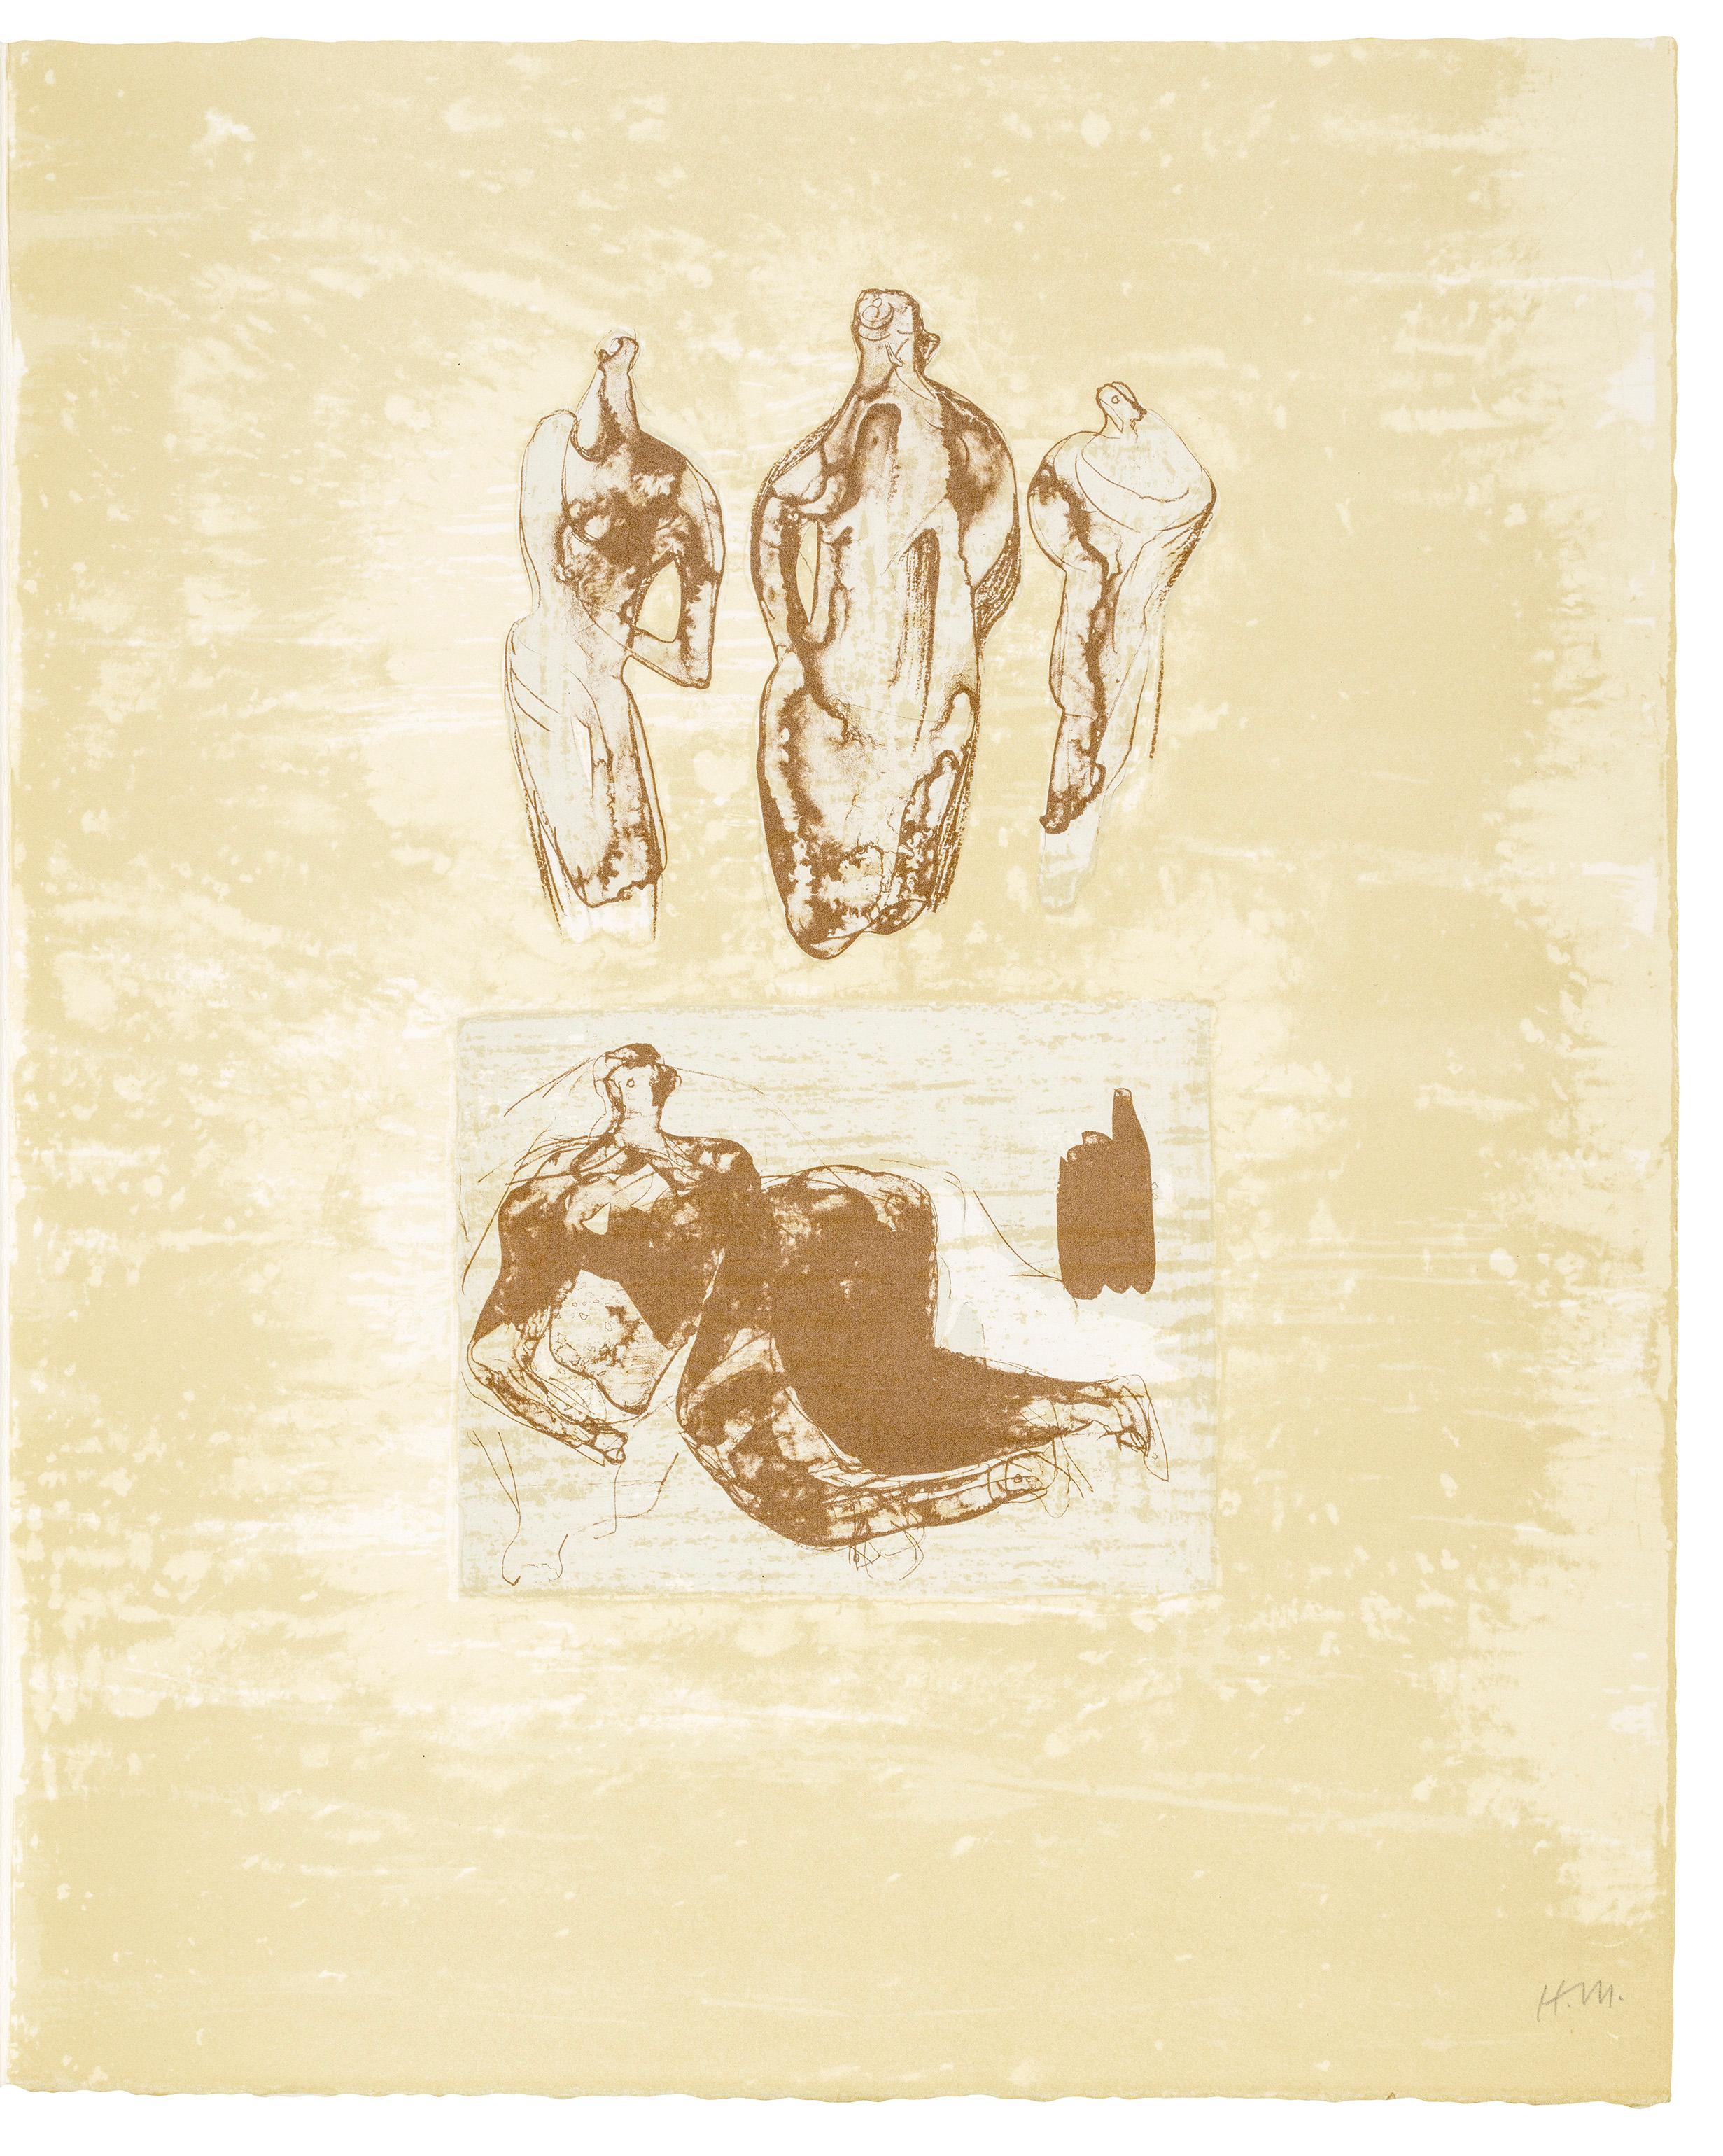 Ideas from a Sketchbook - Henry Moore, Lithograph, Prints, Contemporary Art